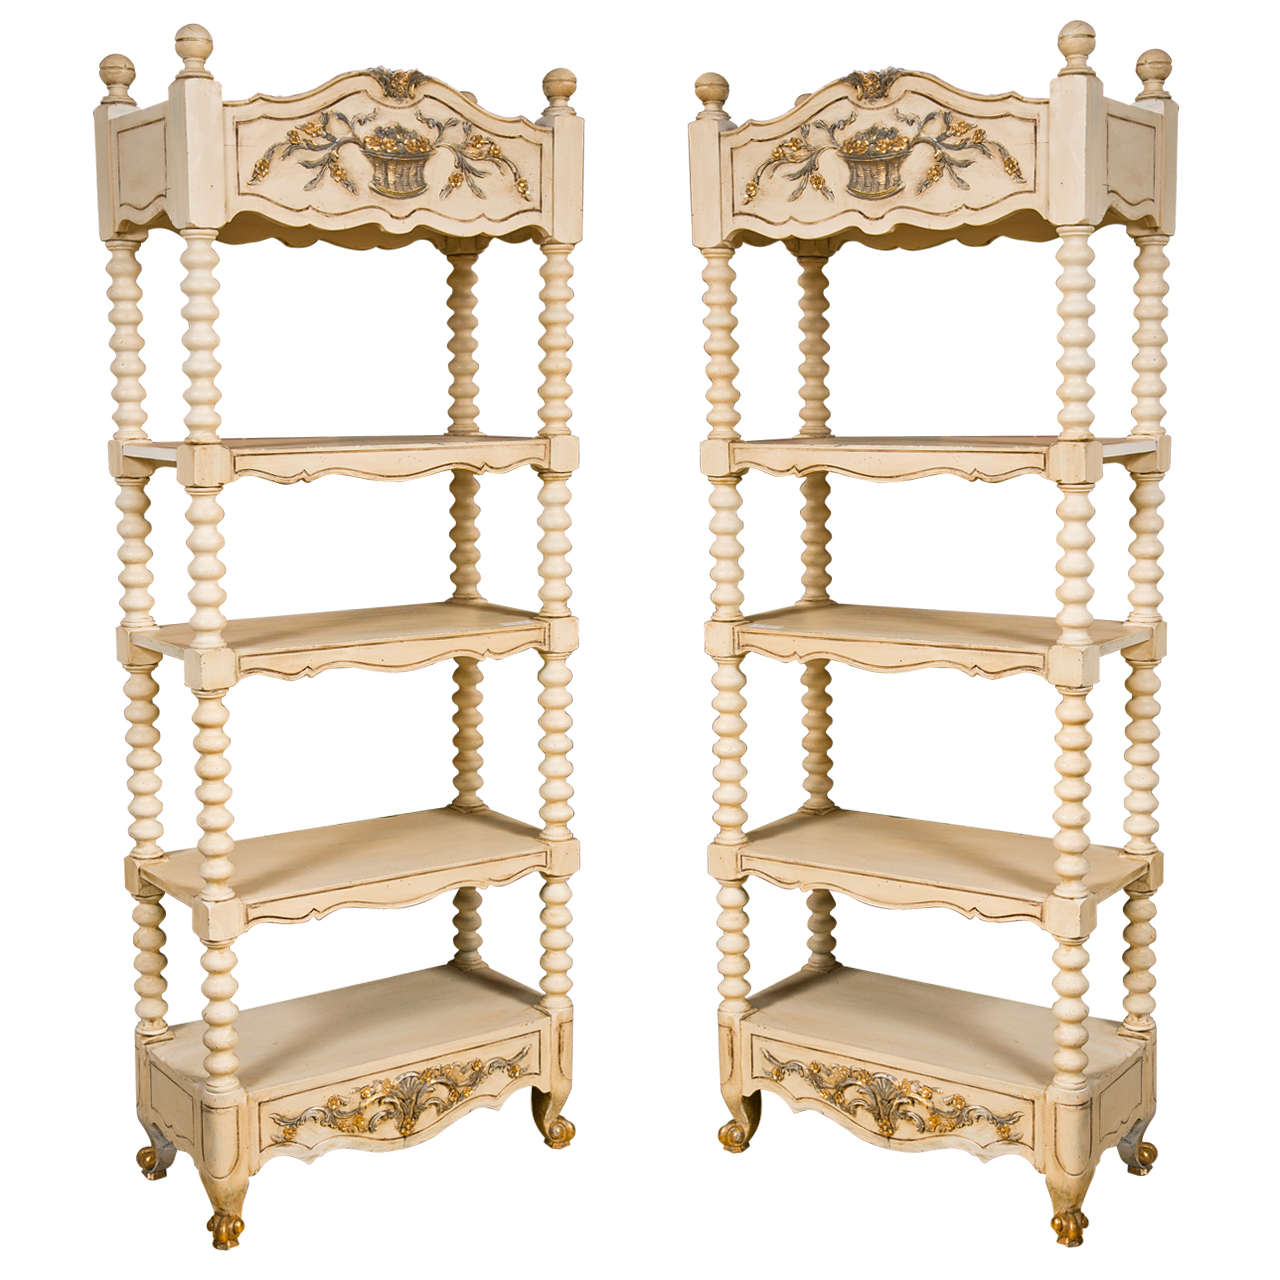 Pair of Decorative Ivory Color Painted Etagere Bookcases With Three Tiers